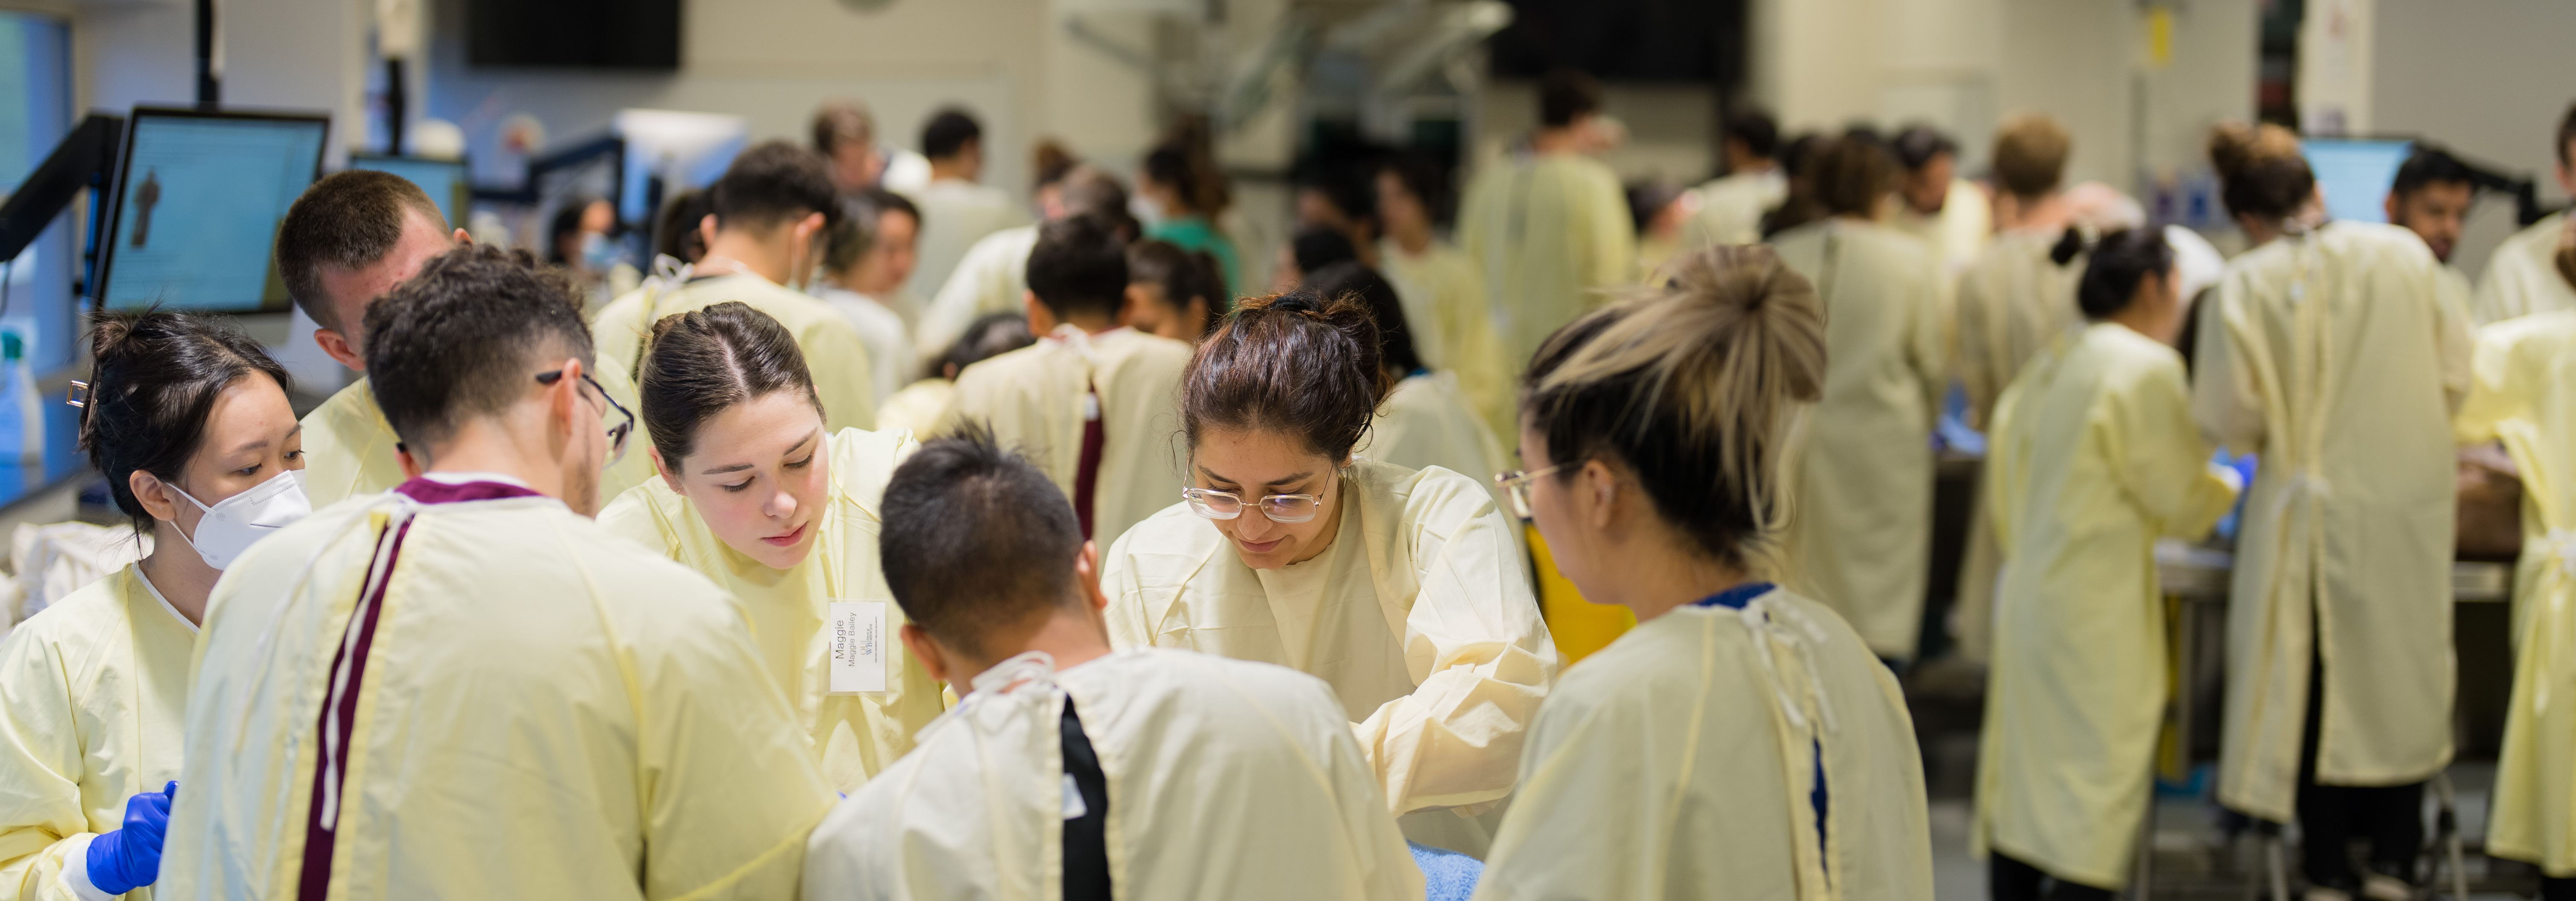 An image of students in the OUWB Anatomy Lab